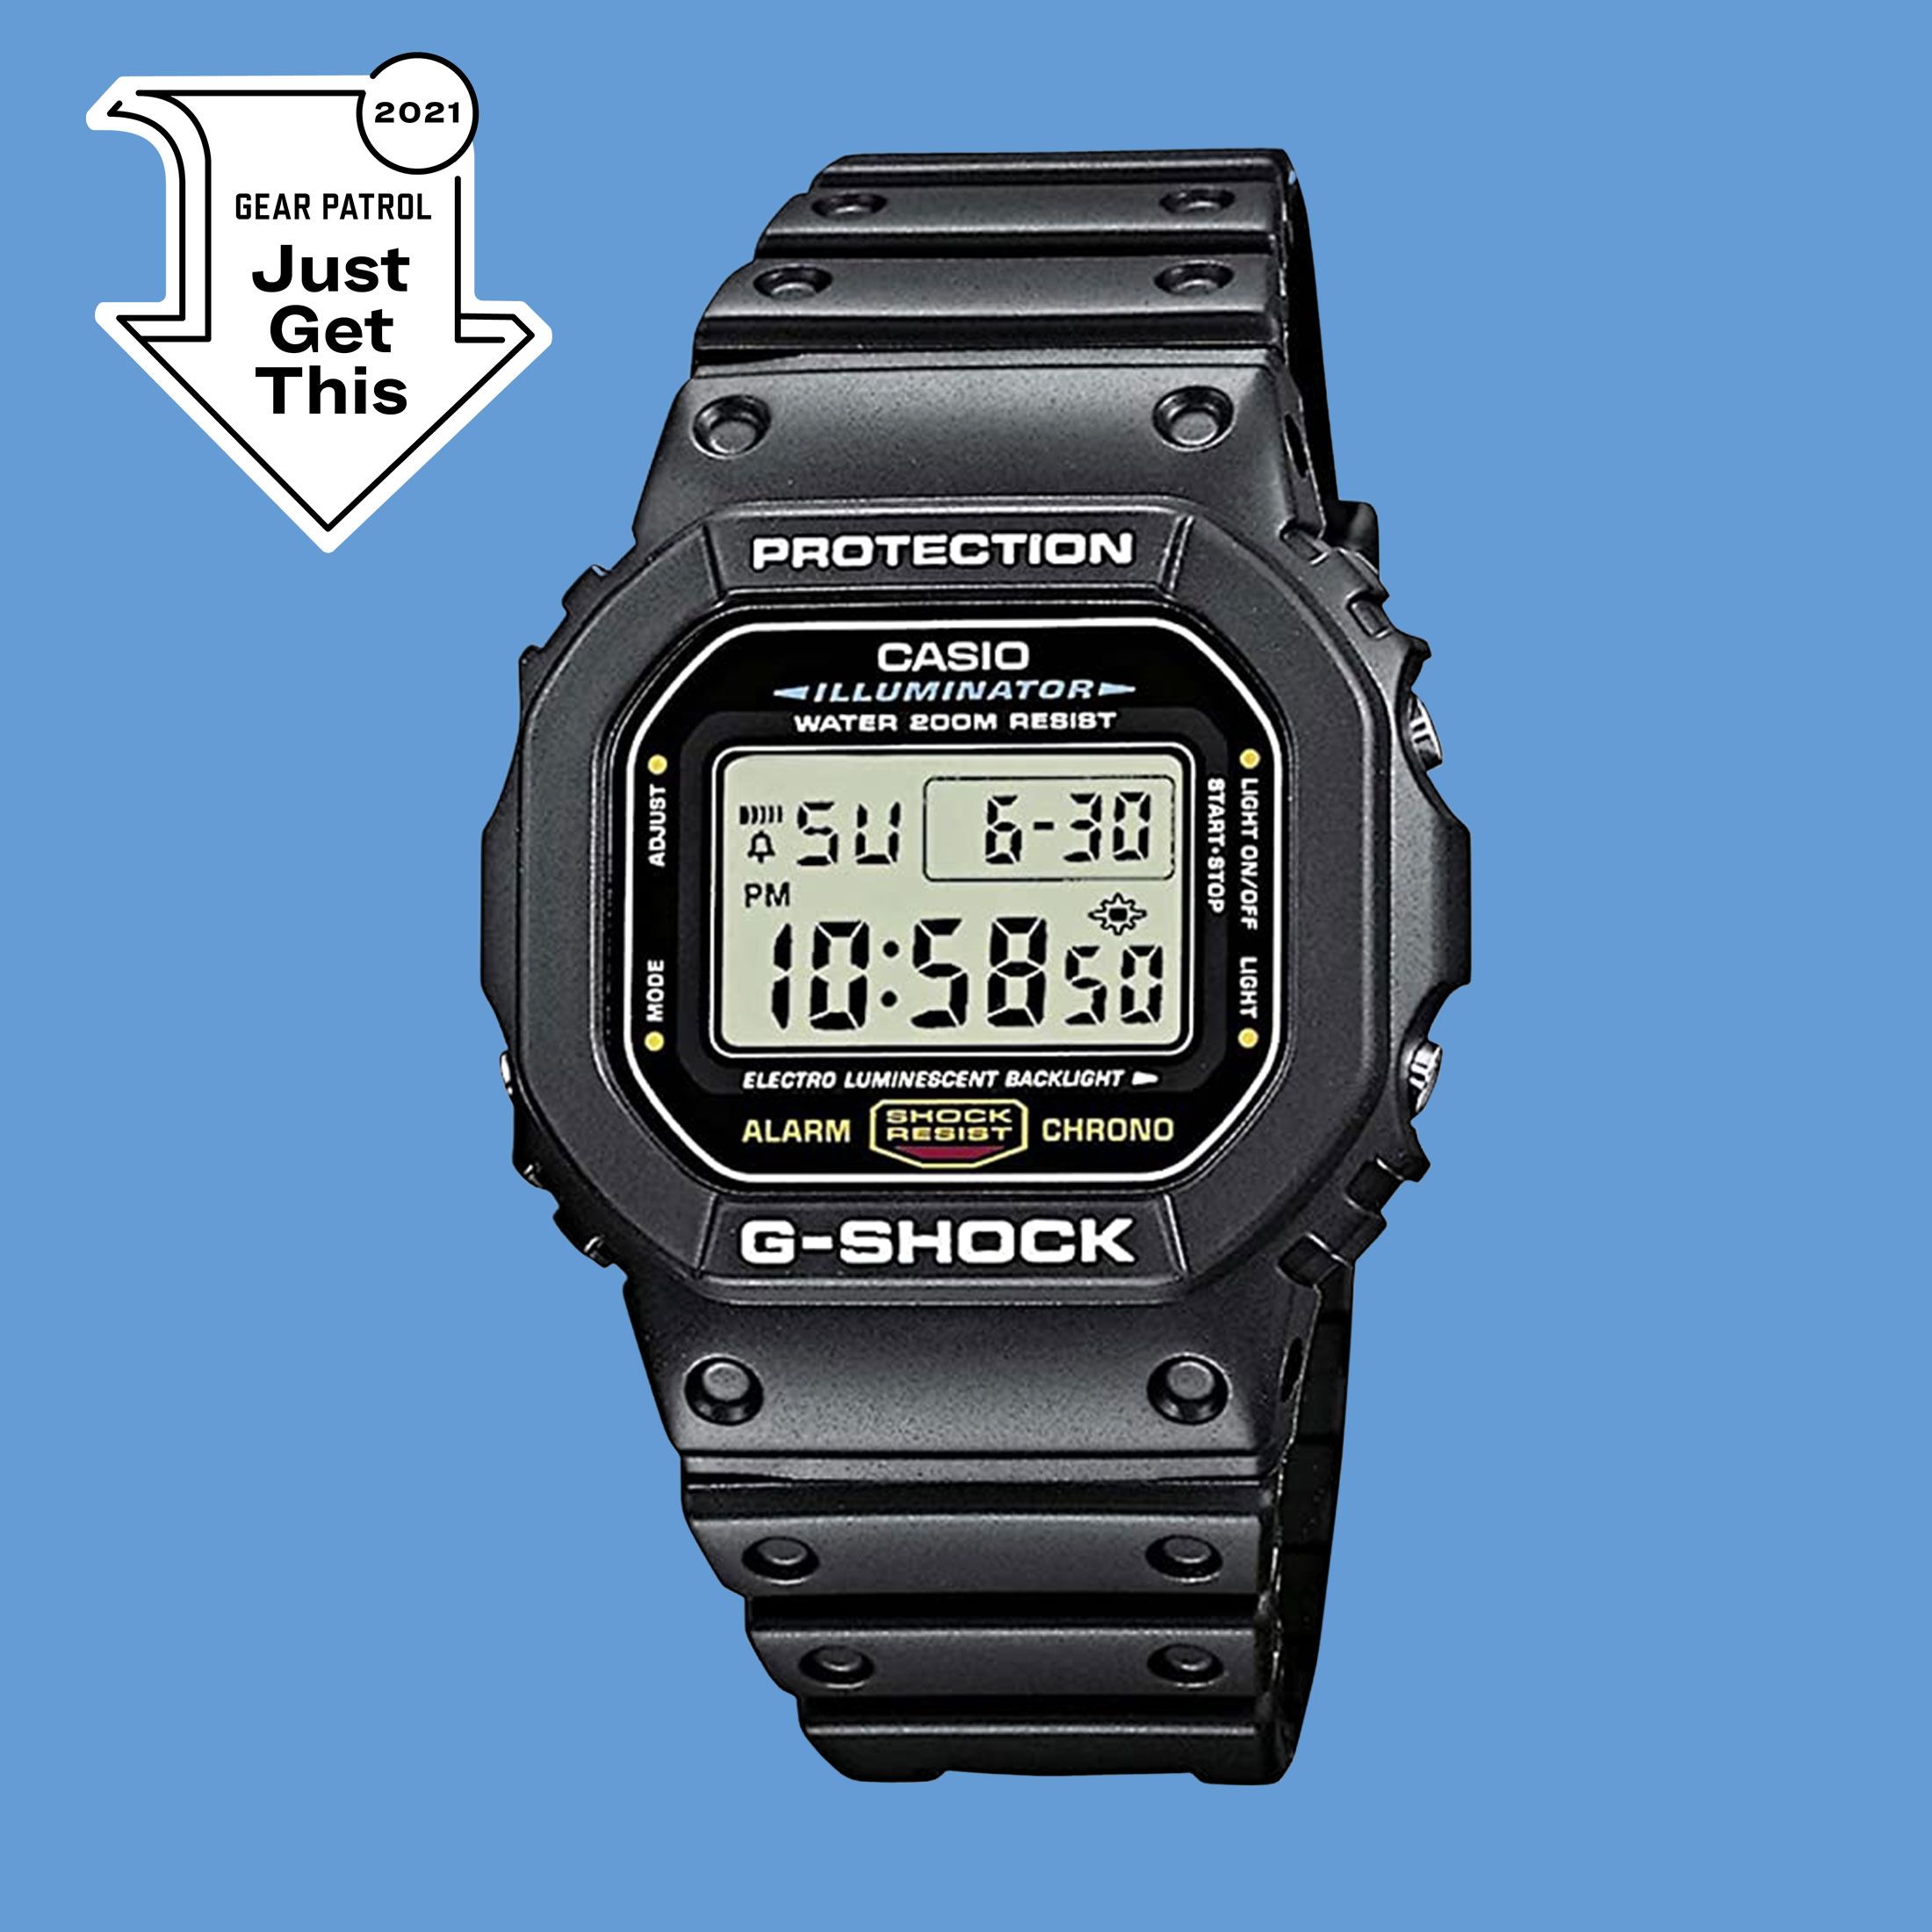 Buy One Digital Watch, This One